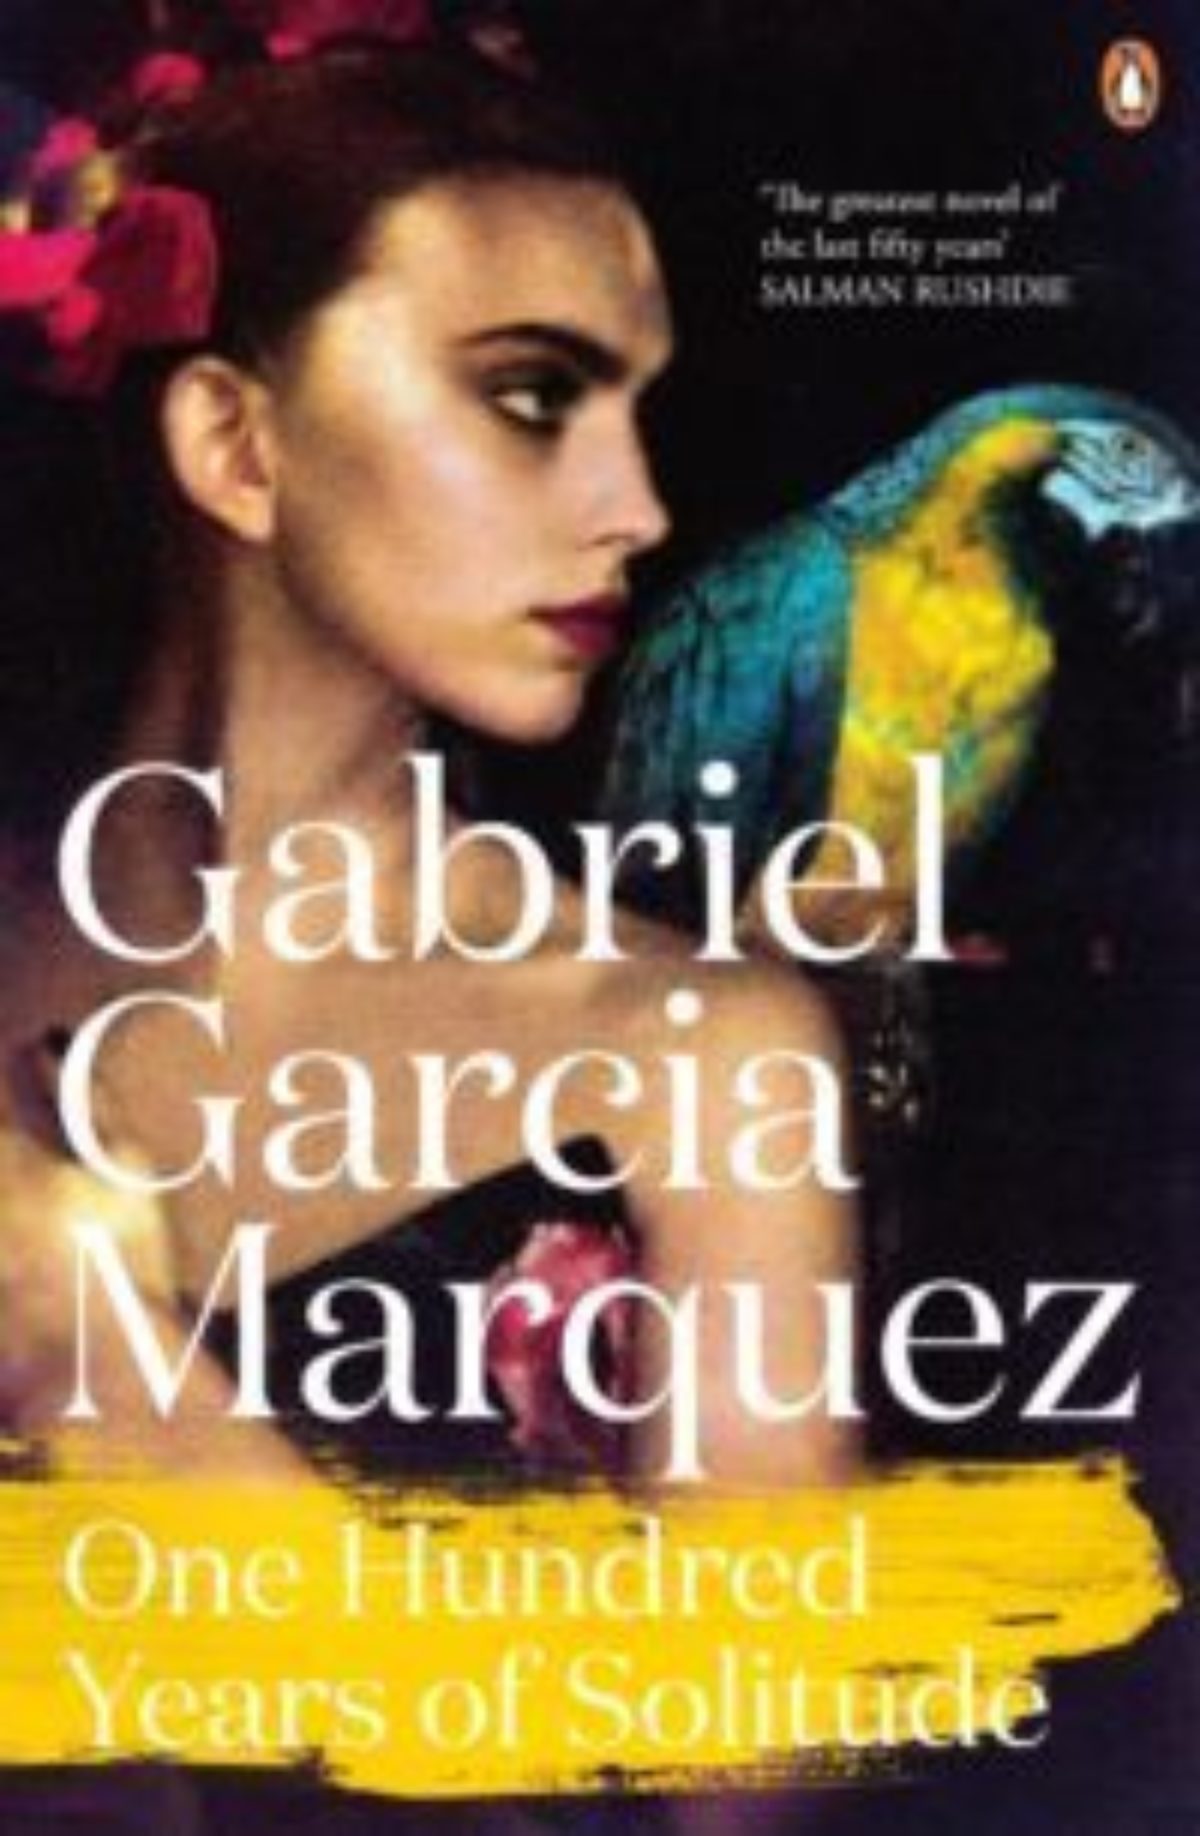 One Hundred Years of Solitude | Gabriel Garcia Marquez | Book Review